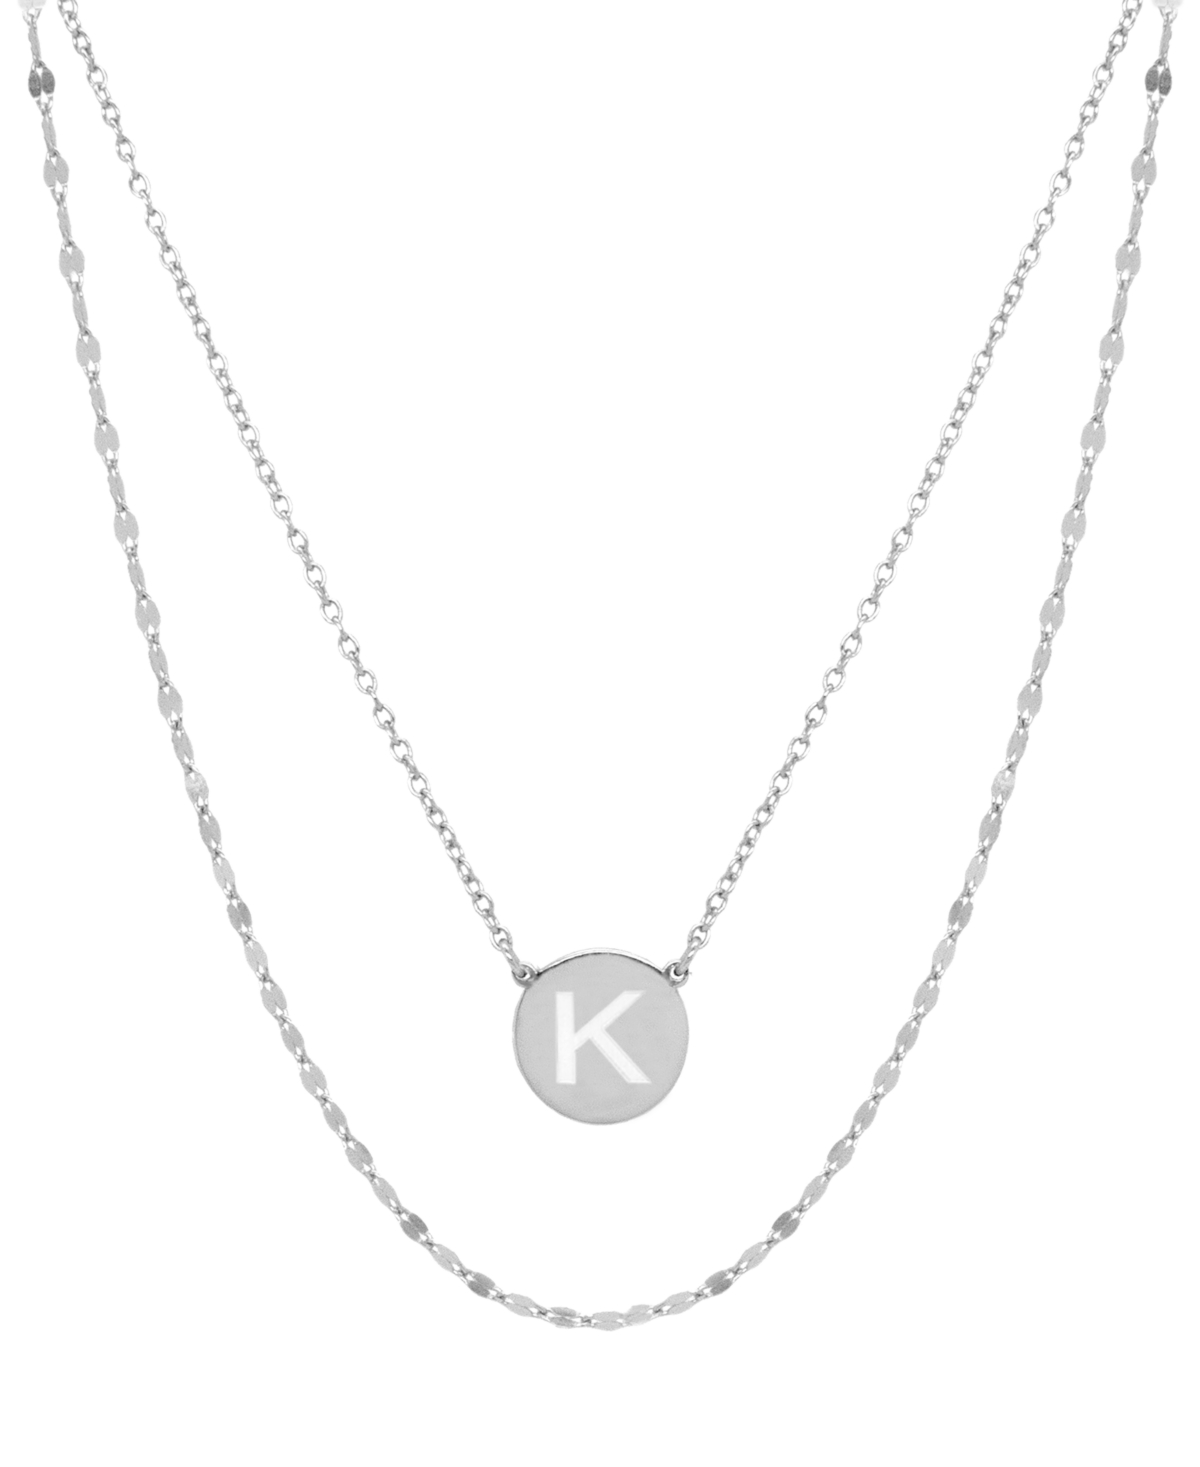 Giani Bernini Initial Disc Layered Pendant Necklace In Sterling Silver, Created For Macy's